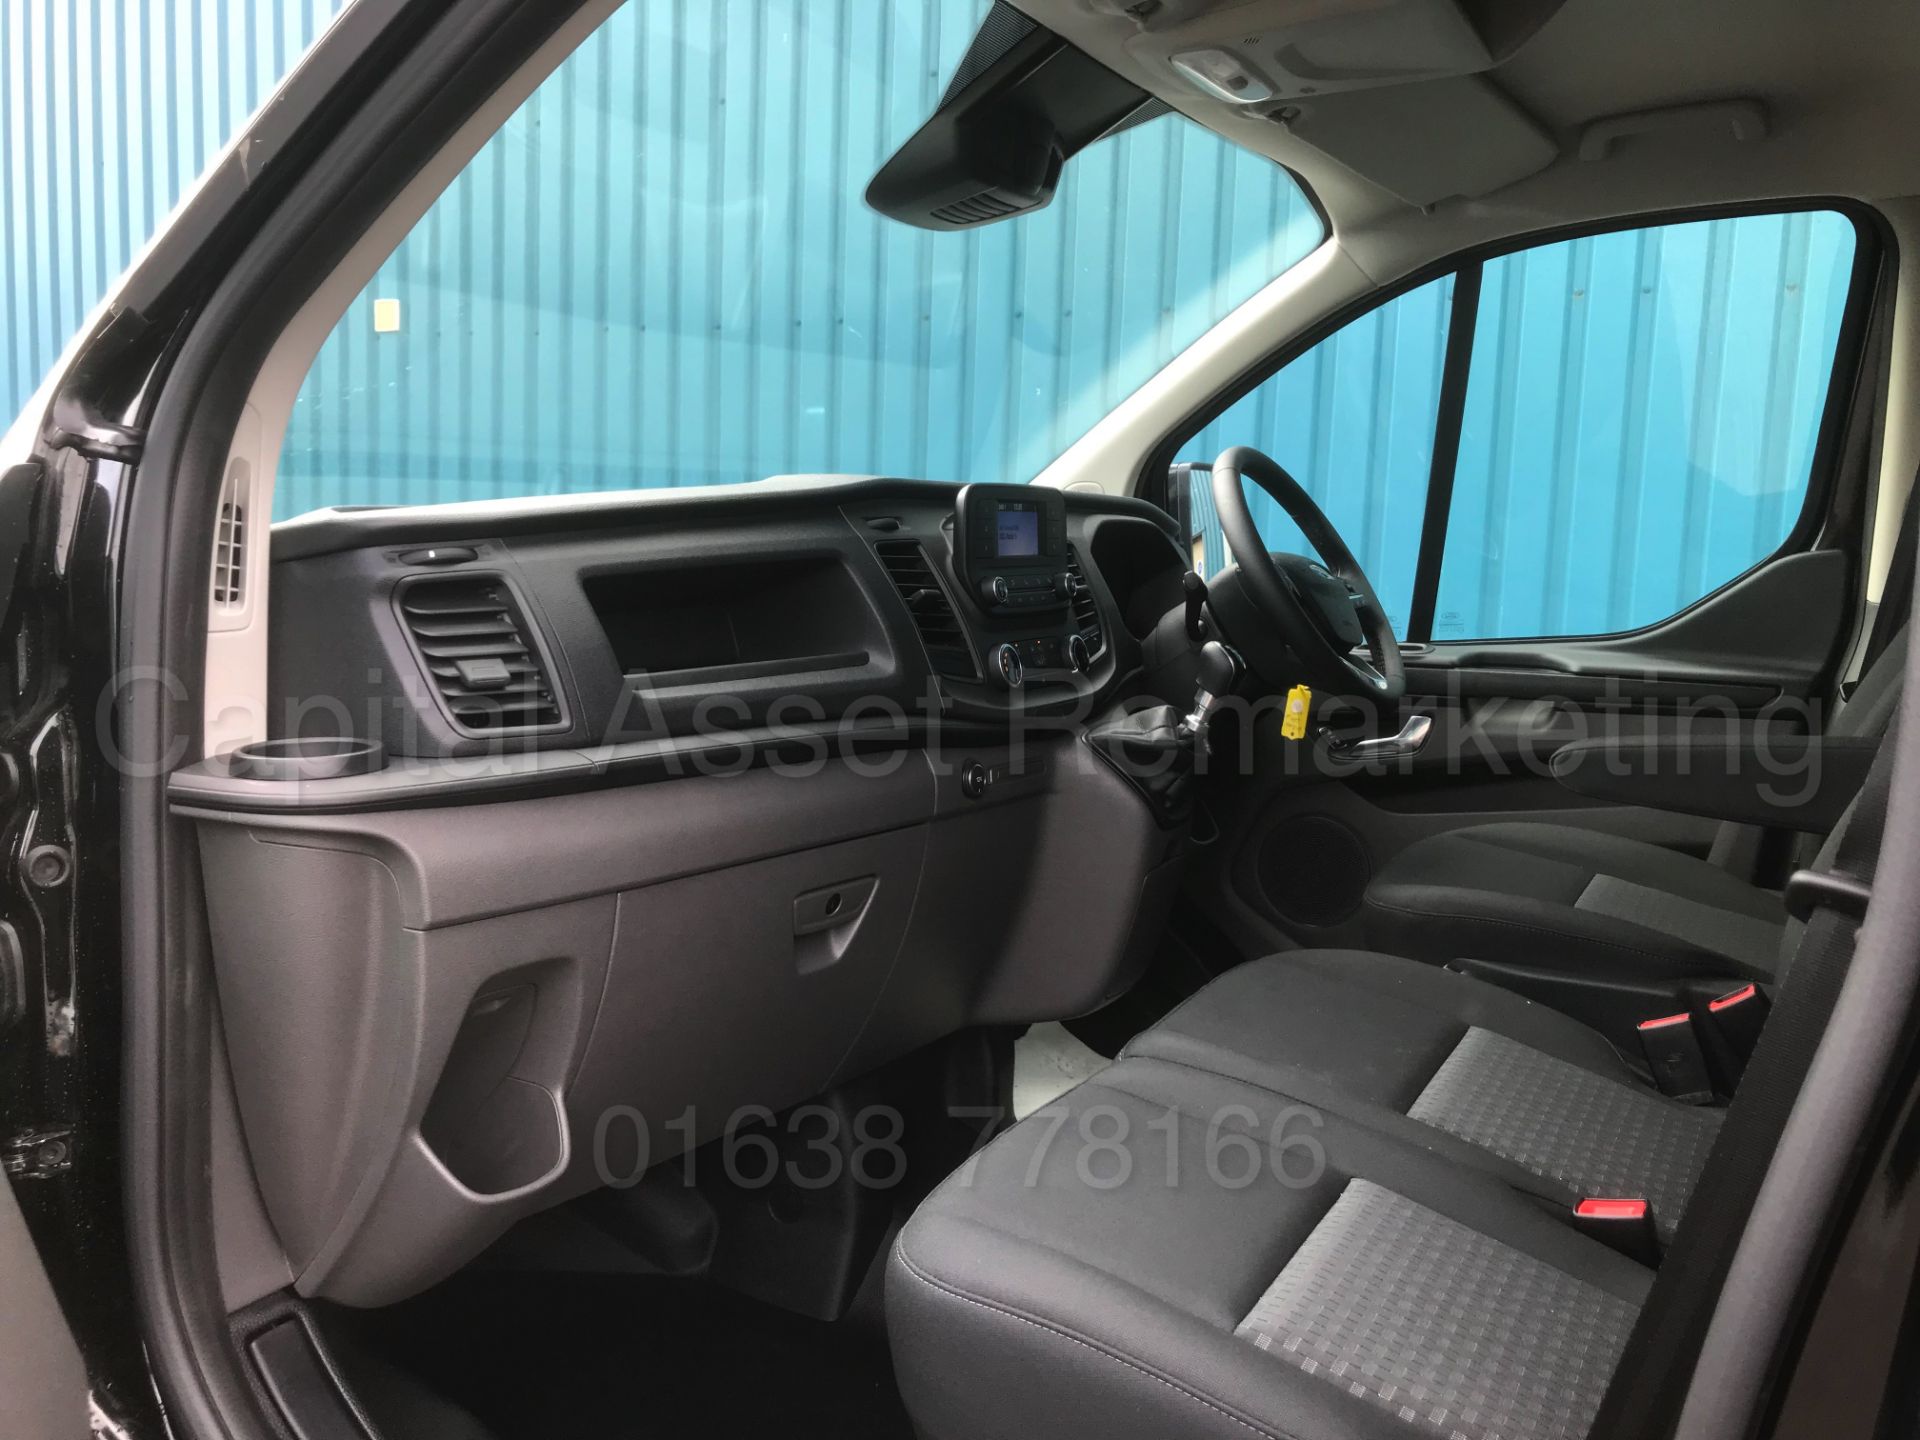 FORD TRANSIT CUSTOM *TREND EDITION* (2018 - ALL NEW MODEL) '2.0 TDCI - 6 SPEED' *DELIVERY MILEAGE* - Image 20 of 49